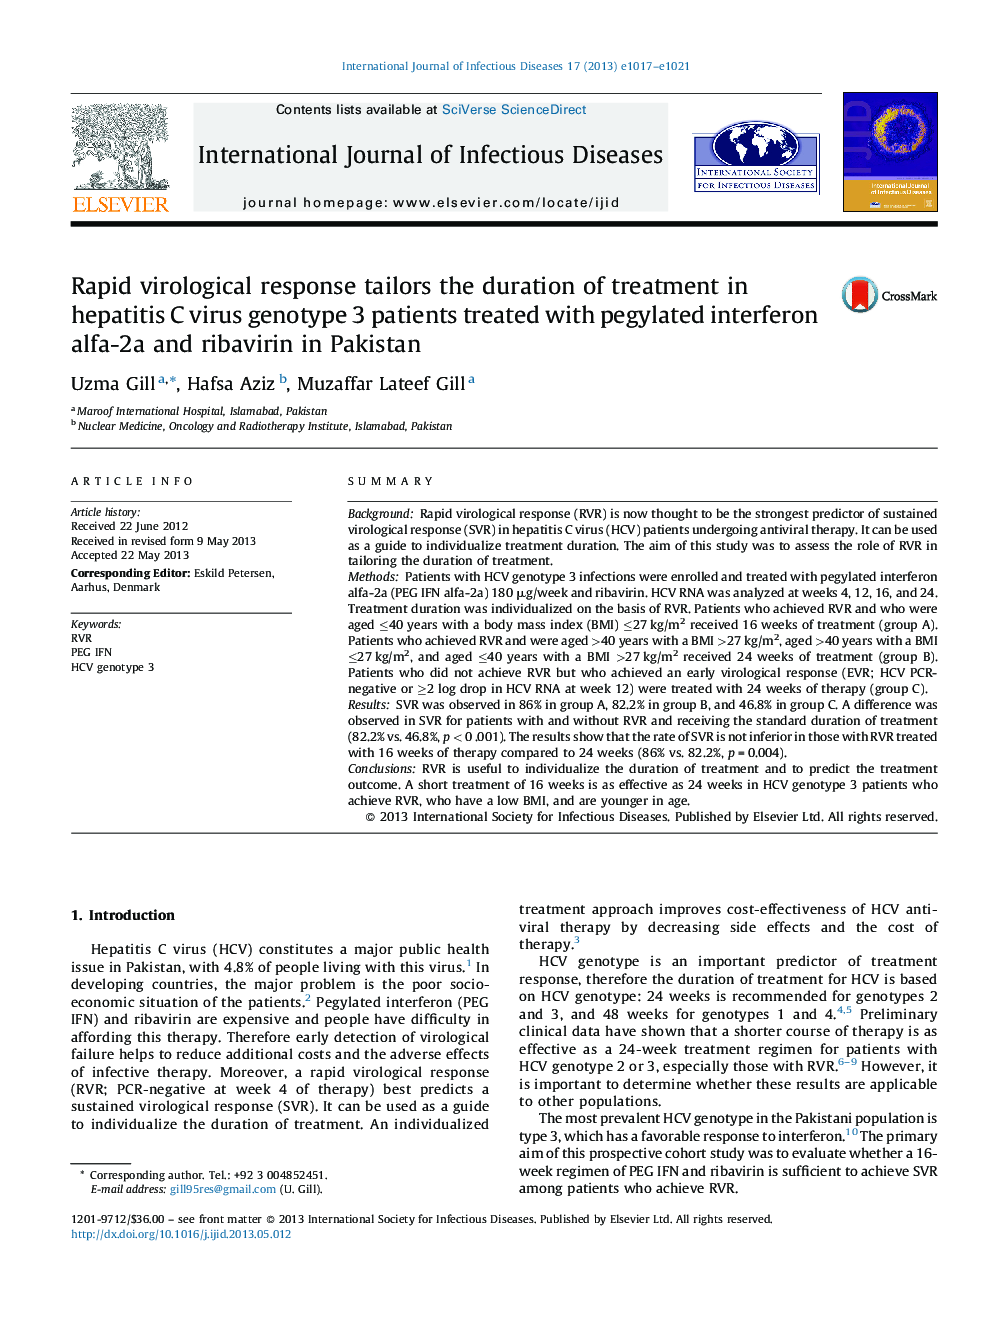 Rapid virological response tailors the duration of treatment in hepatitis C virus genotype 3 patients treated with pegylated interferon alfa-2a and ribavirin in Pakistan